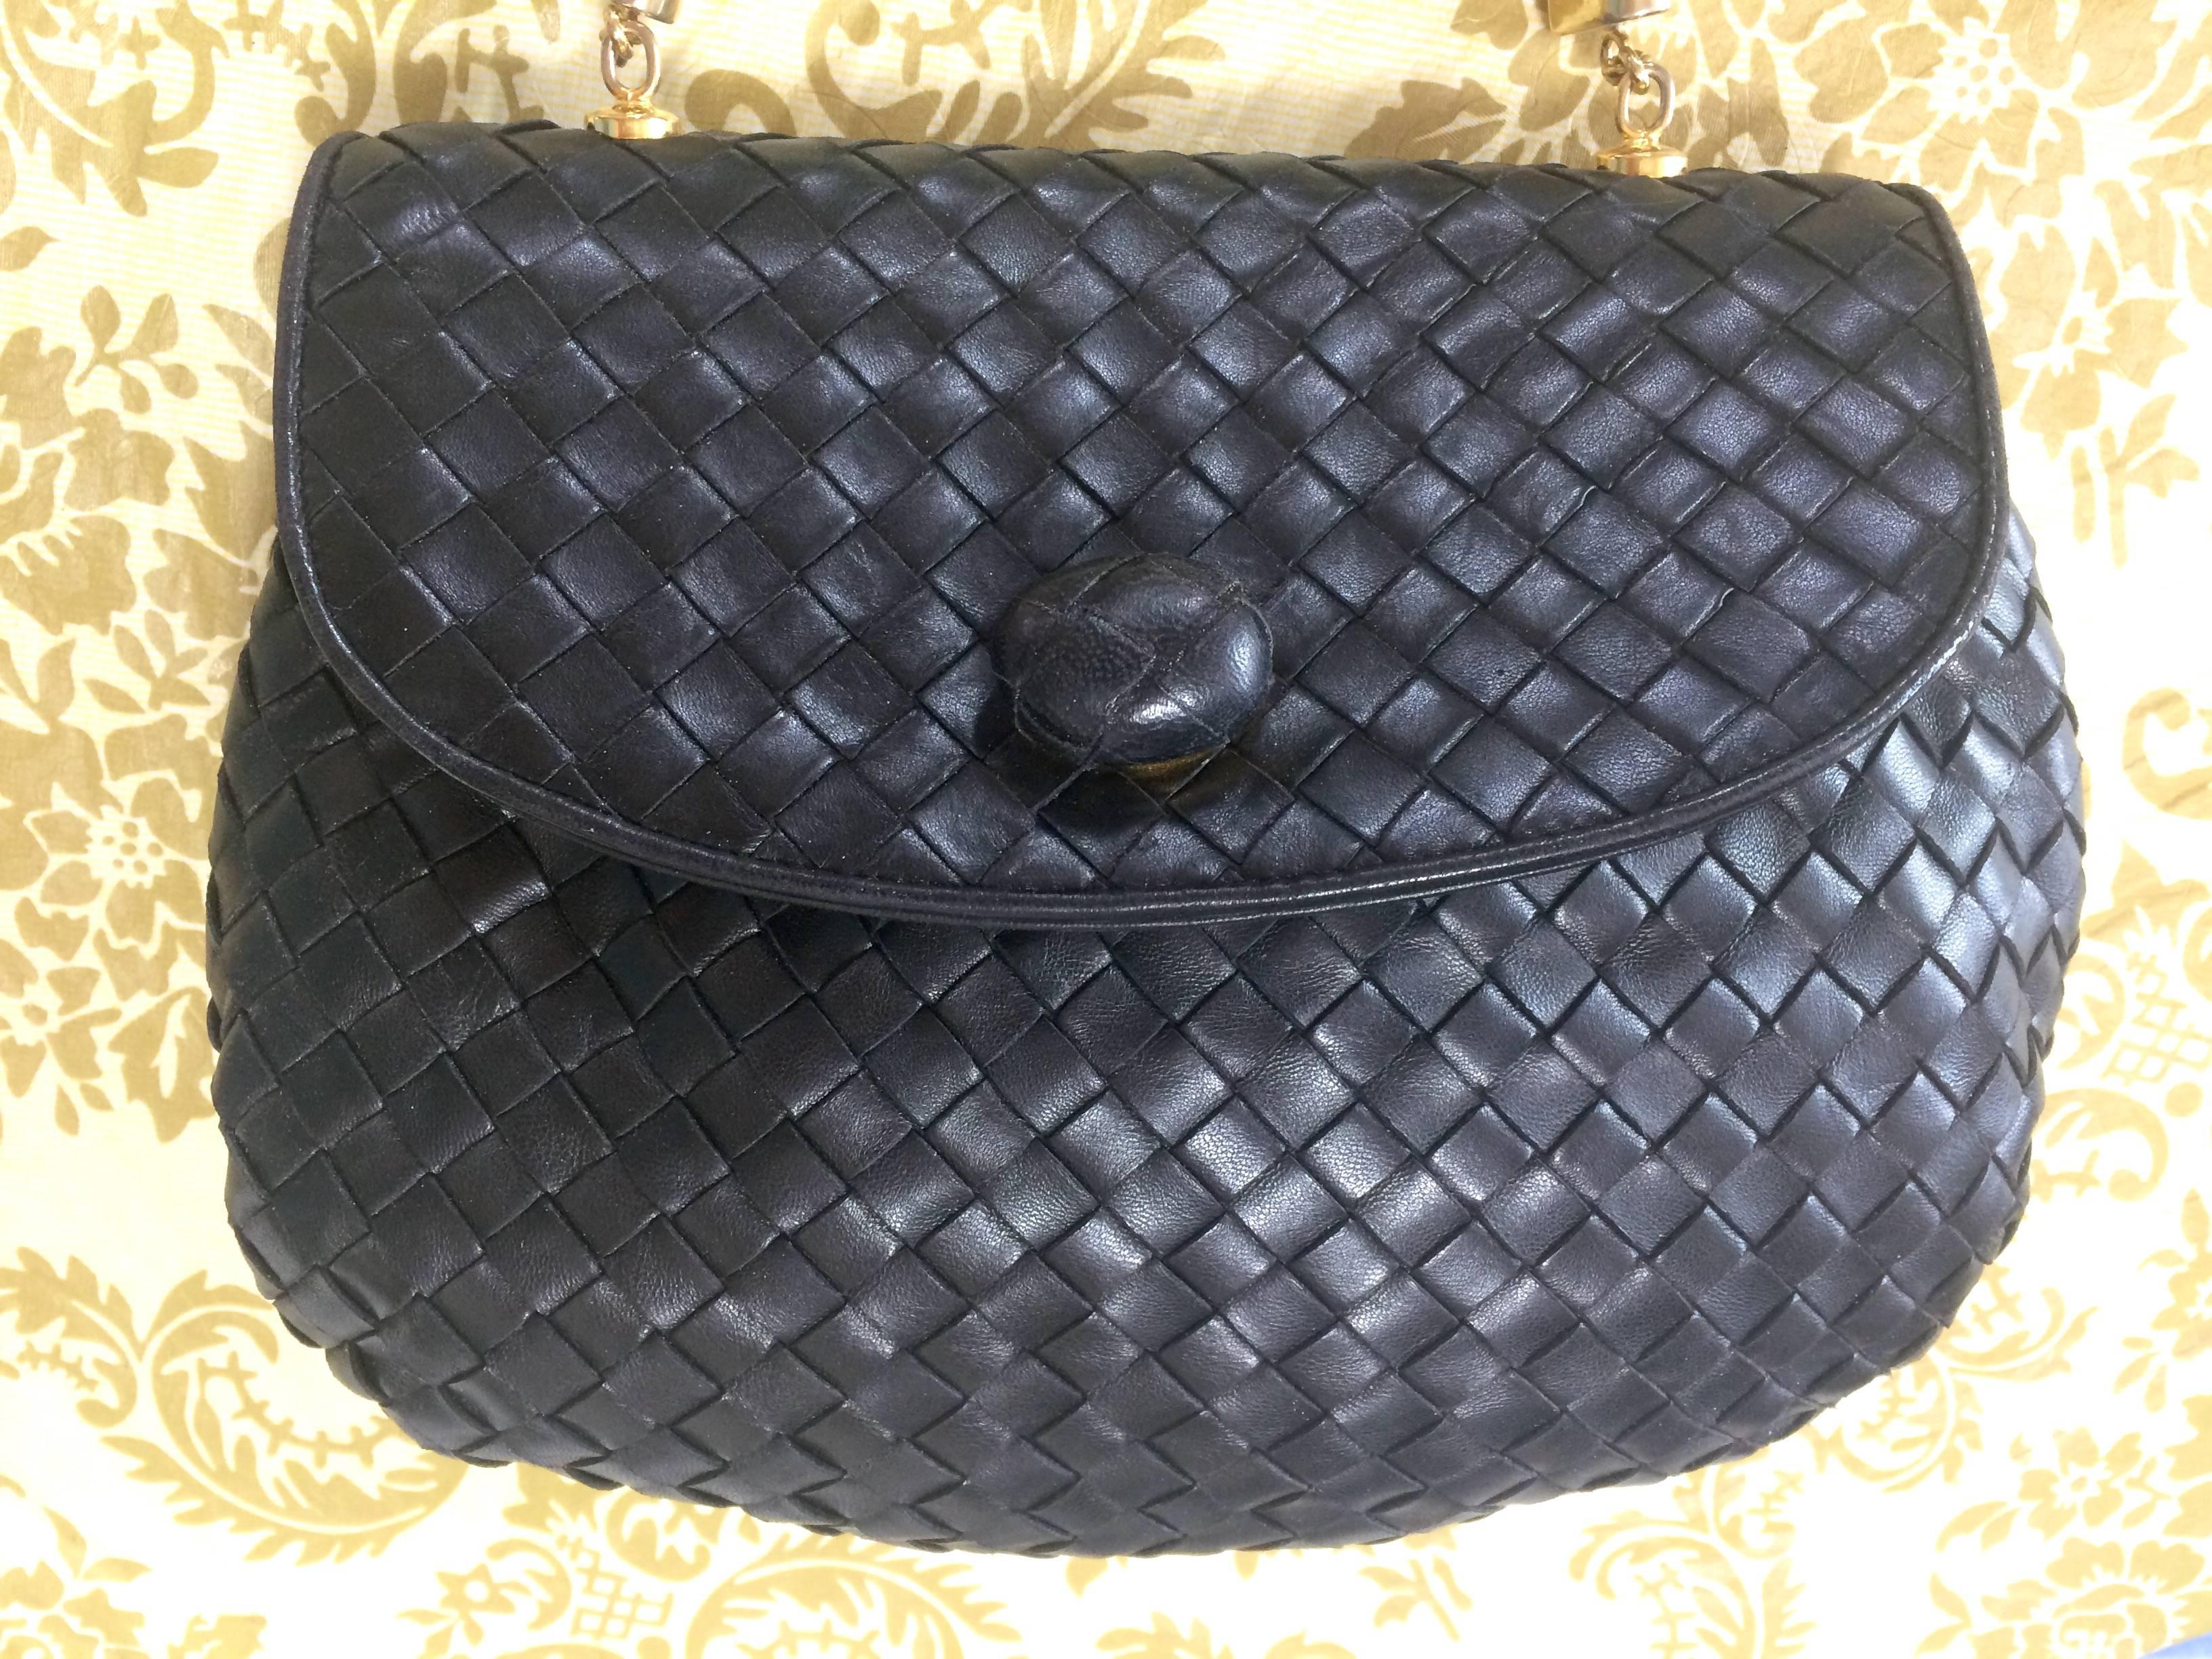 1990s. Vintage Bottega Veneta black intrecciato, woven lambskin handbag with a matching turn-lock closure.

Bottega Veneta's iconic style  intrecciato from early 90's.
The classic black intrecciato bag will make you look absolutely stunning and